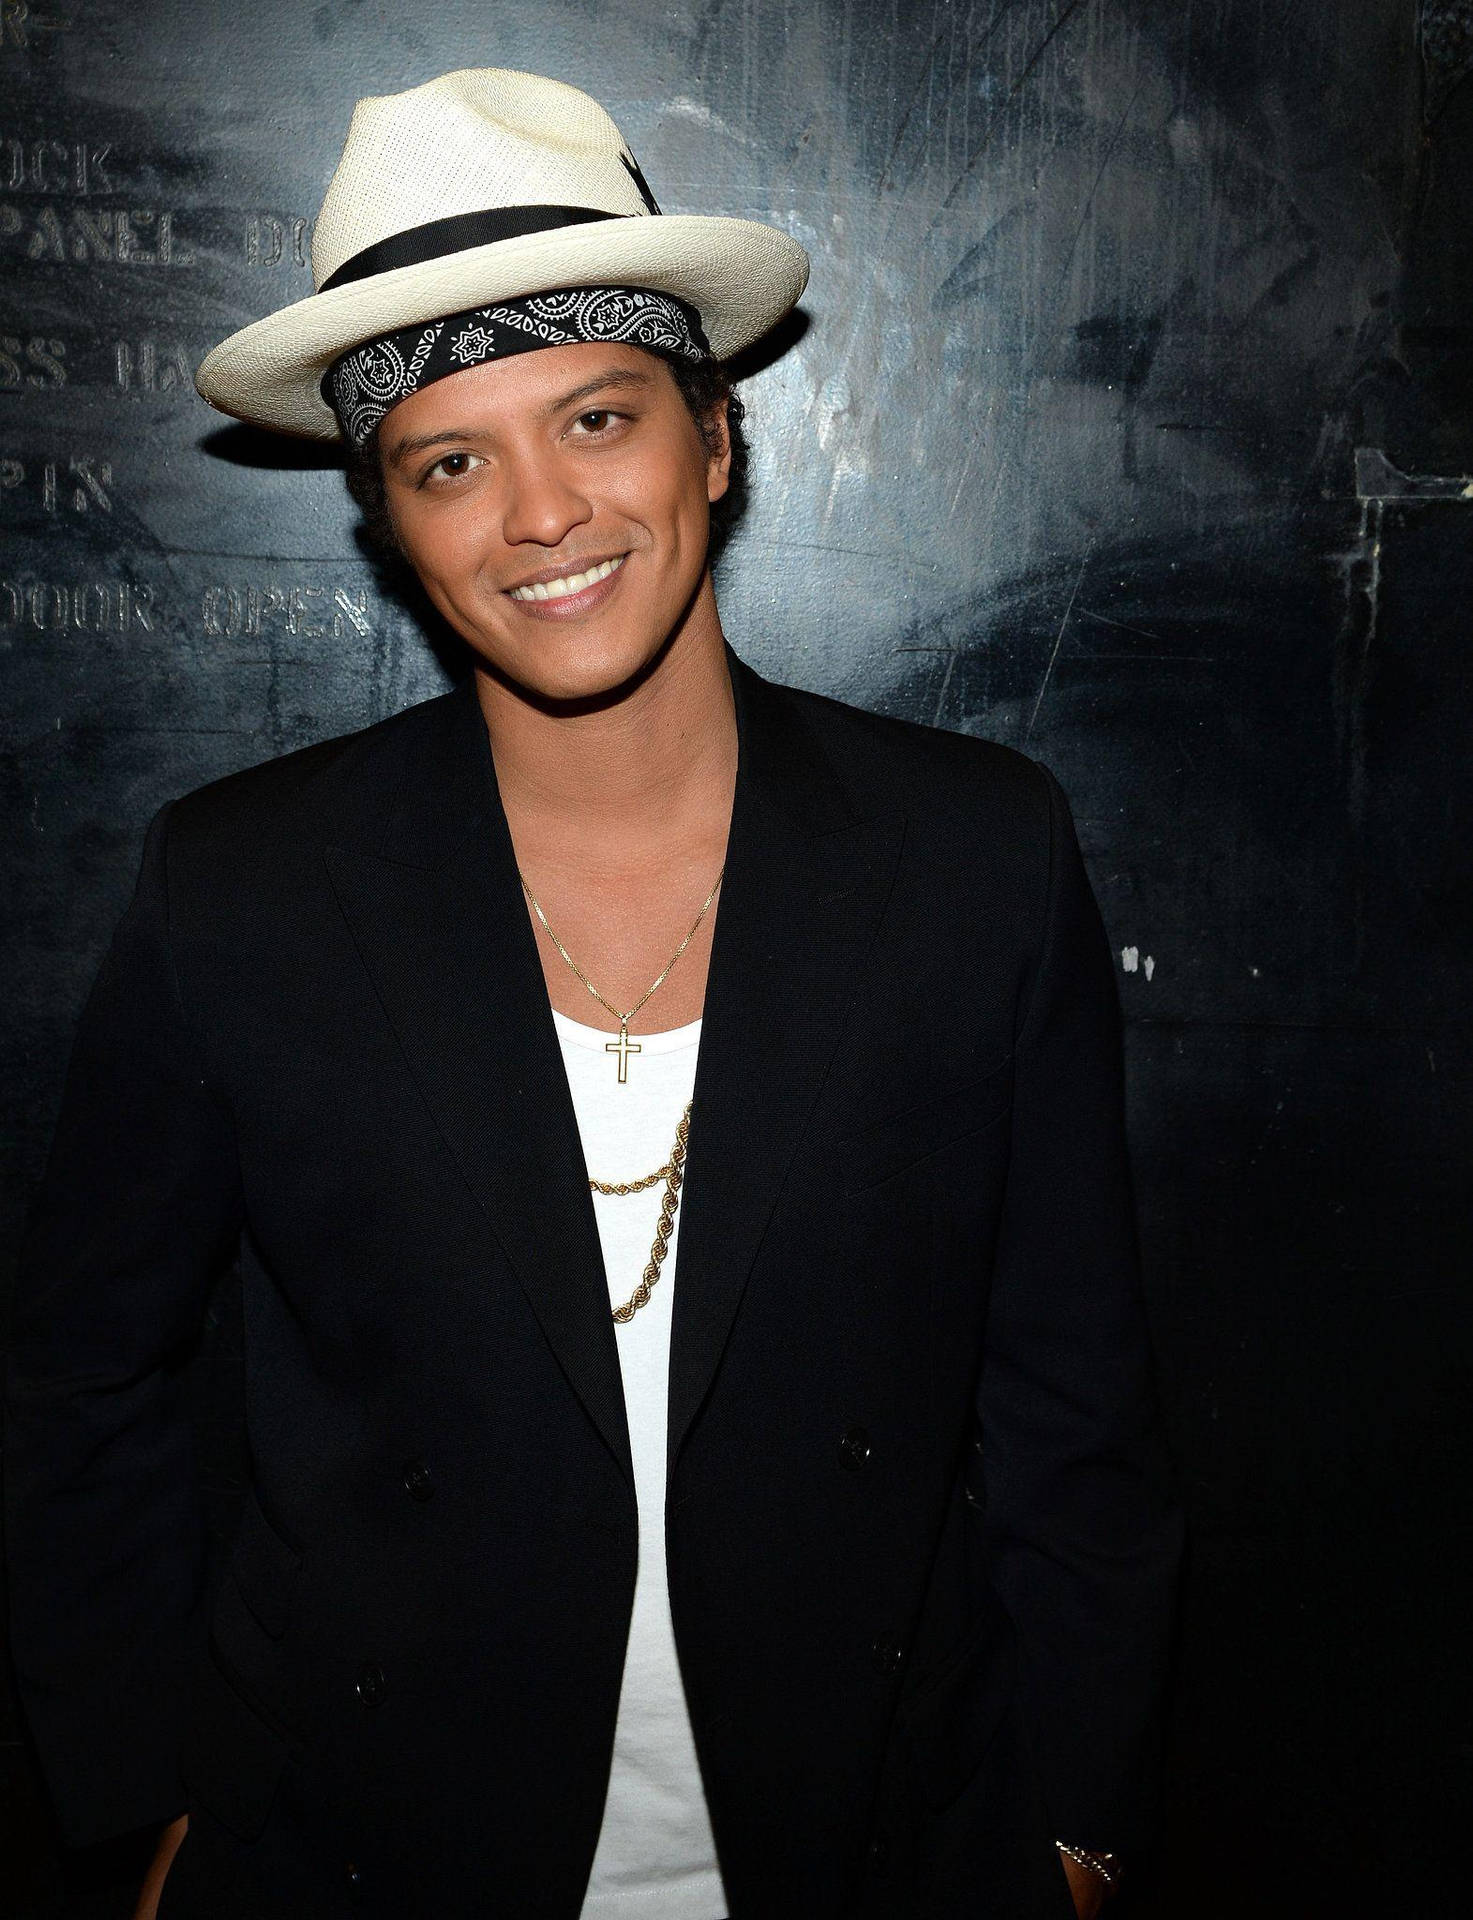 The Incomparable Bruno Mars With His Signature Smile! Background